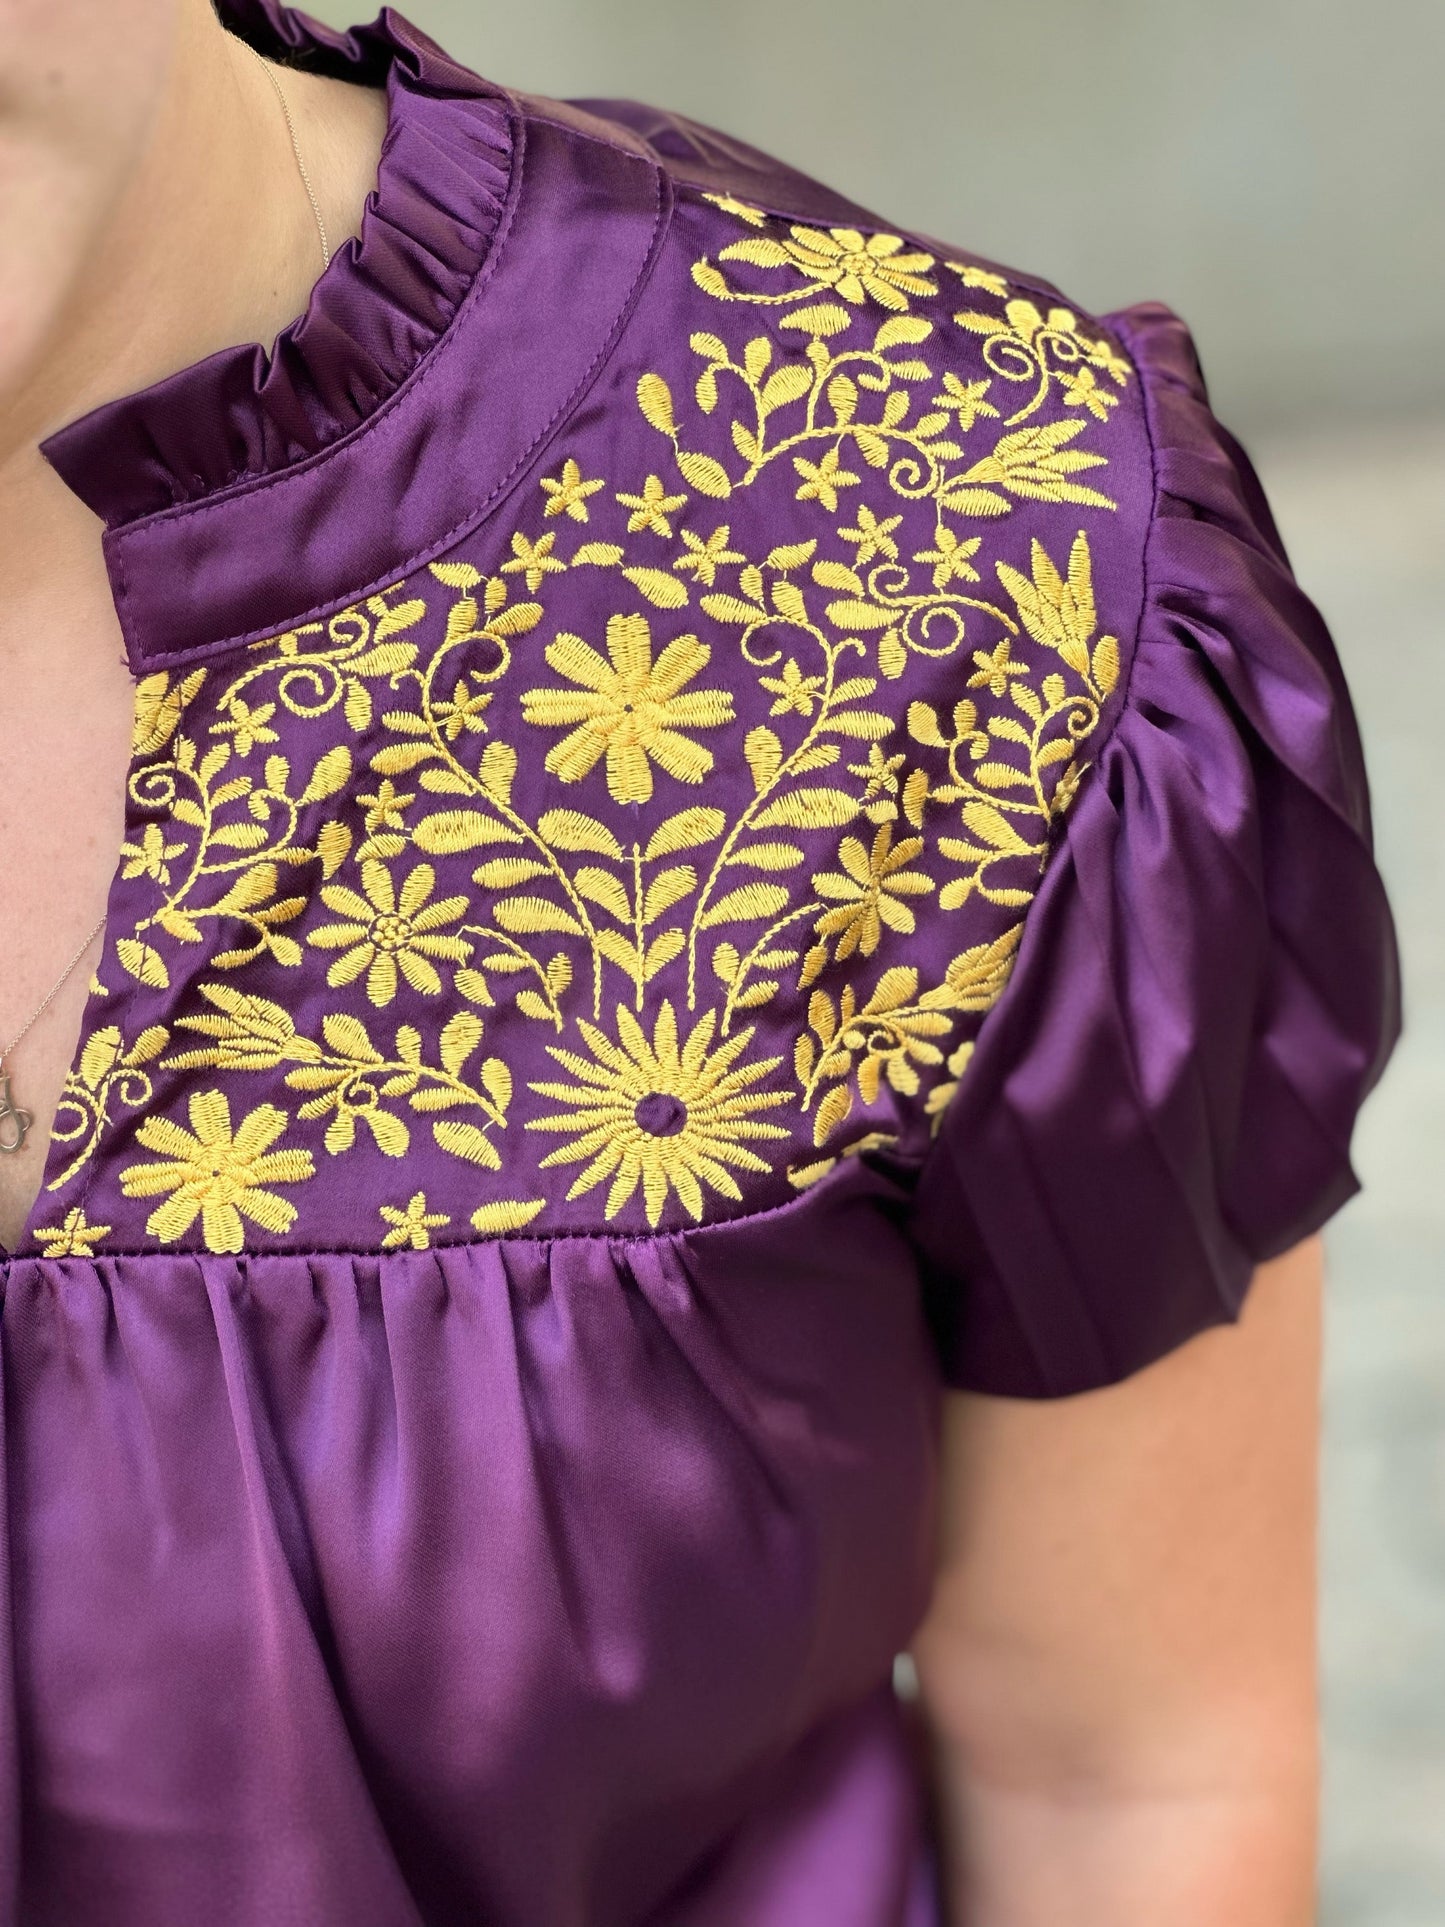 Hey LSU Fans, the Breck Top by Washco Apparel is fun, soft and silky! We love the pop of beautiful gold embroidery design on the front and that it is part of our Game Day Collection!